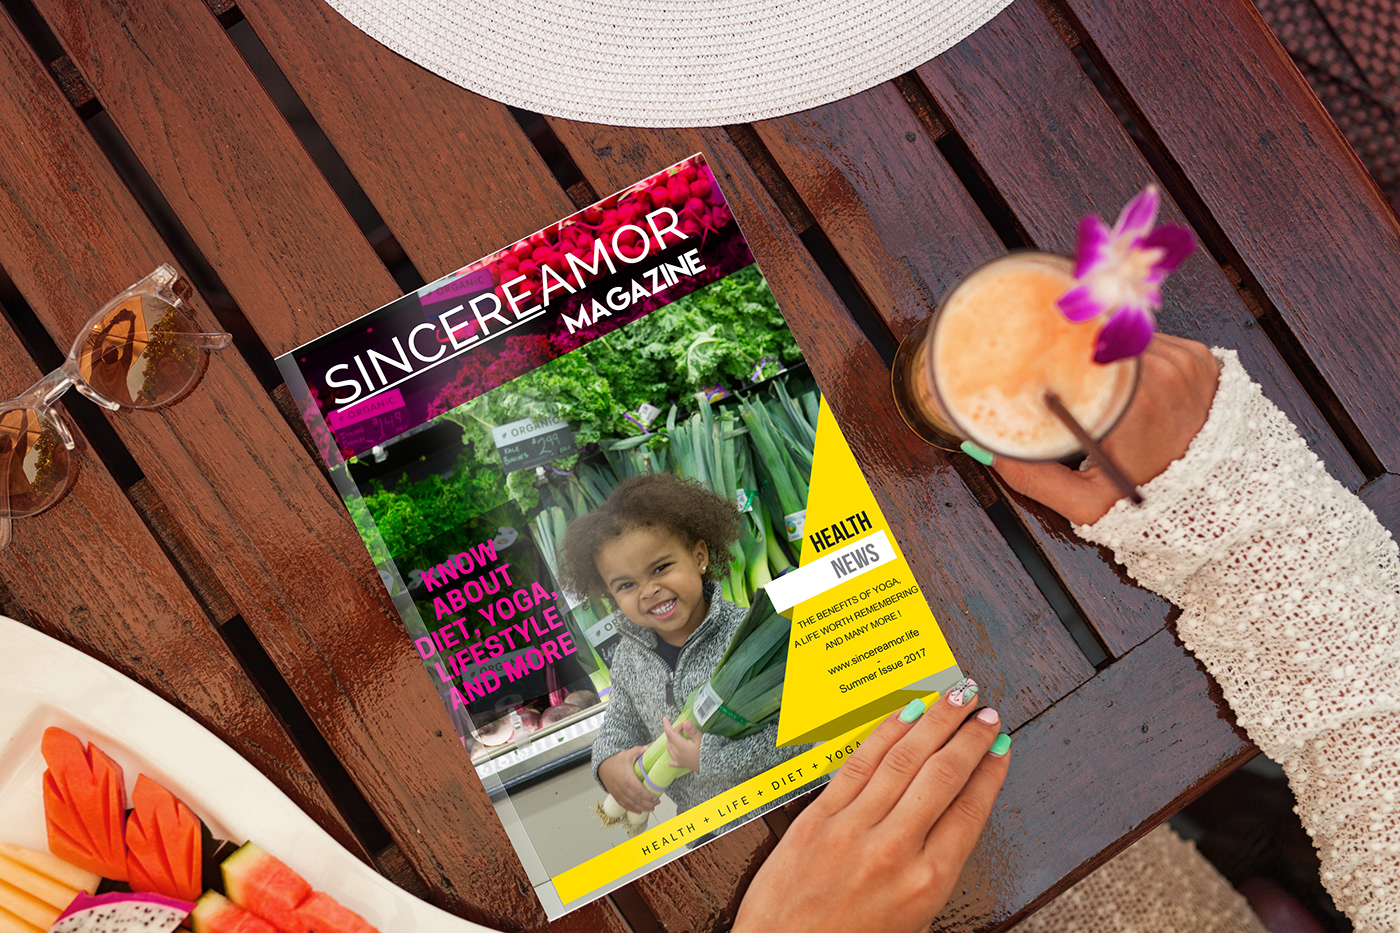 sincereamor magazine official